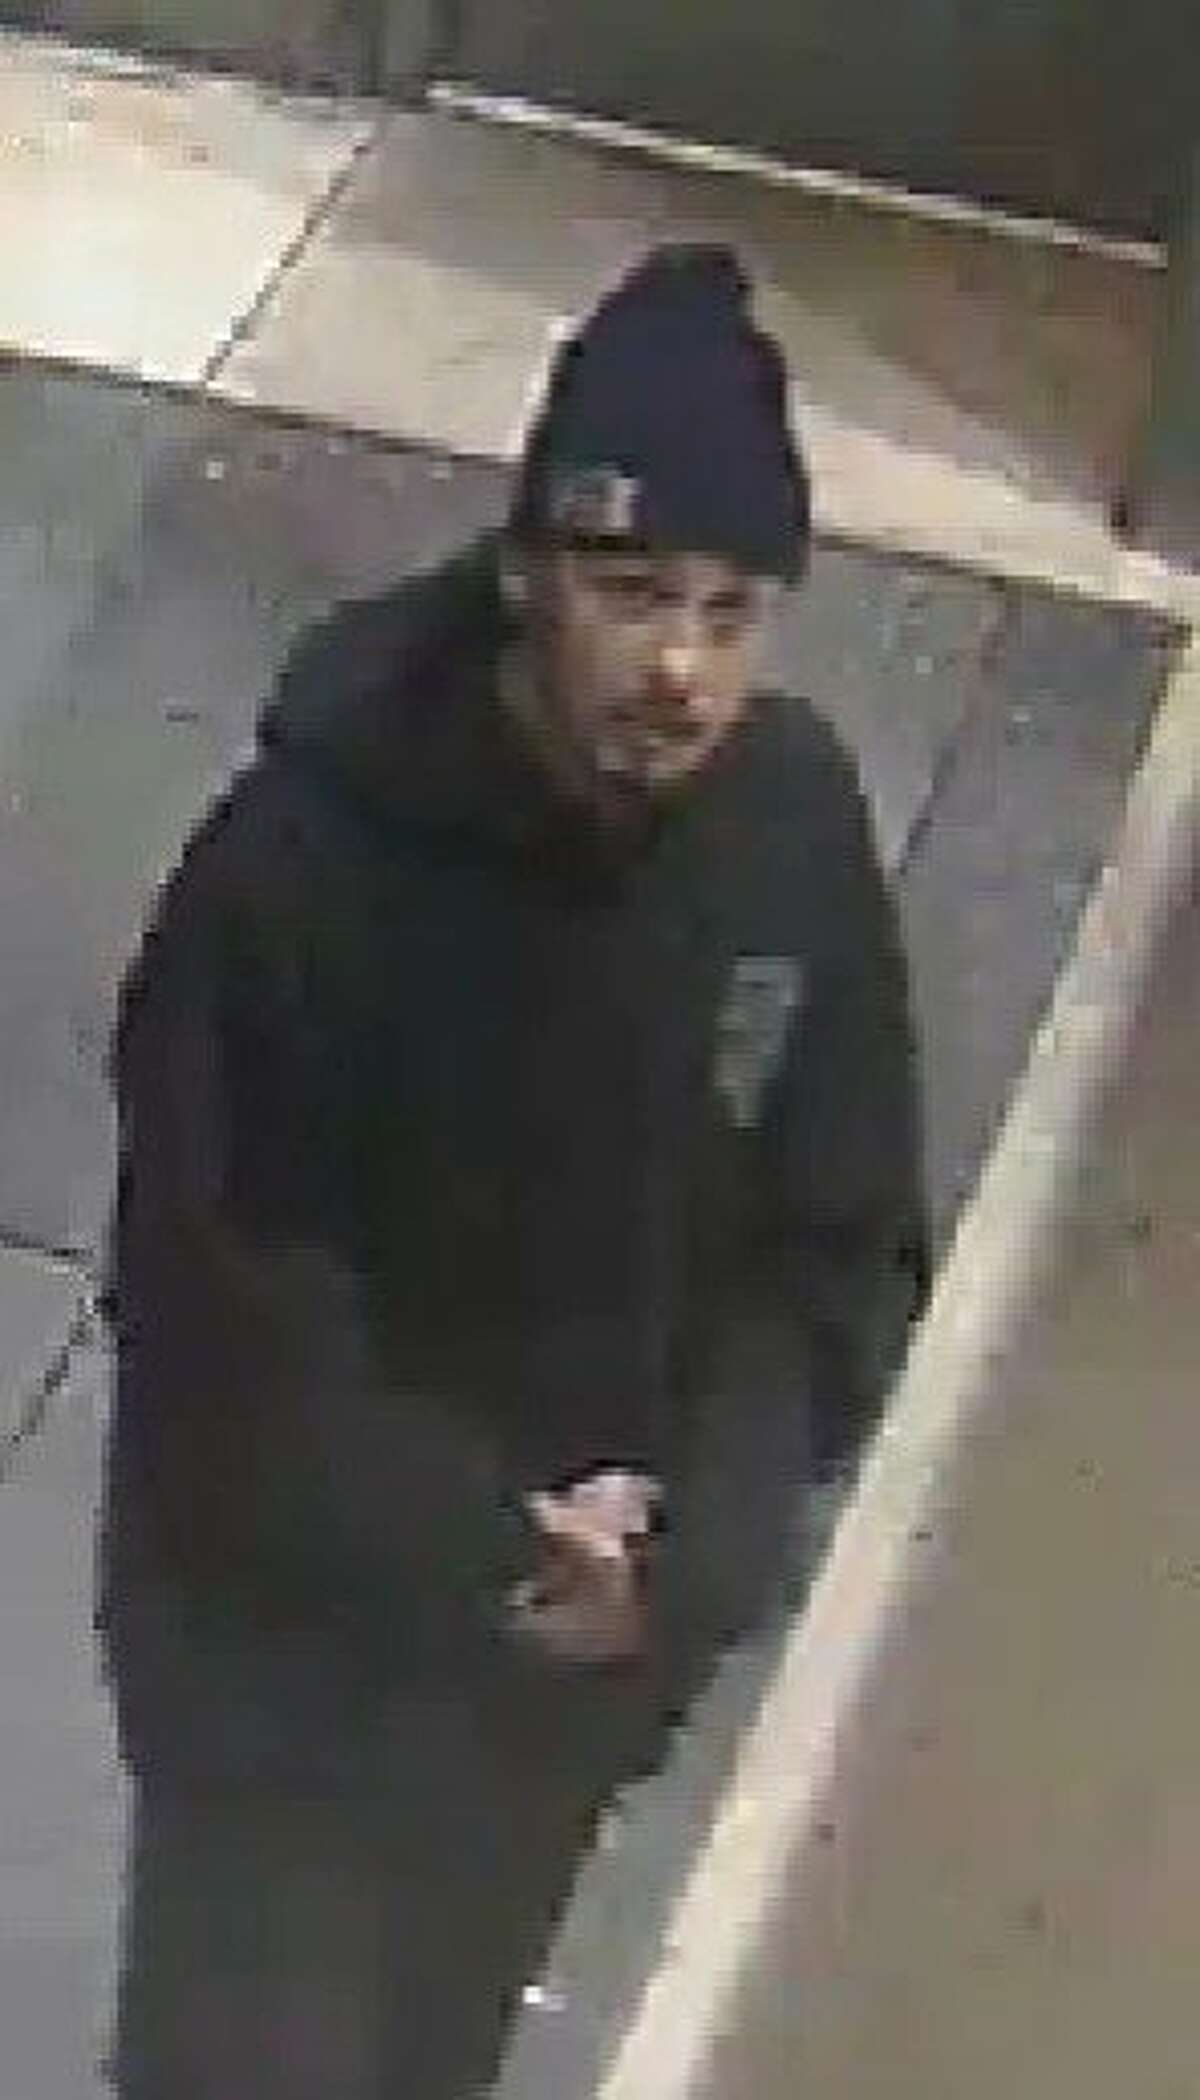 BART police are asking for the public's help in identifying a man they believed may be connected to an early morning stabbing near the Warm Springs / South Fremont BART station.